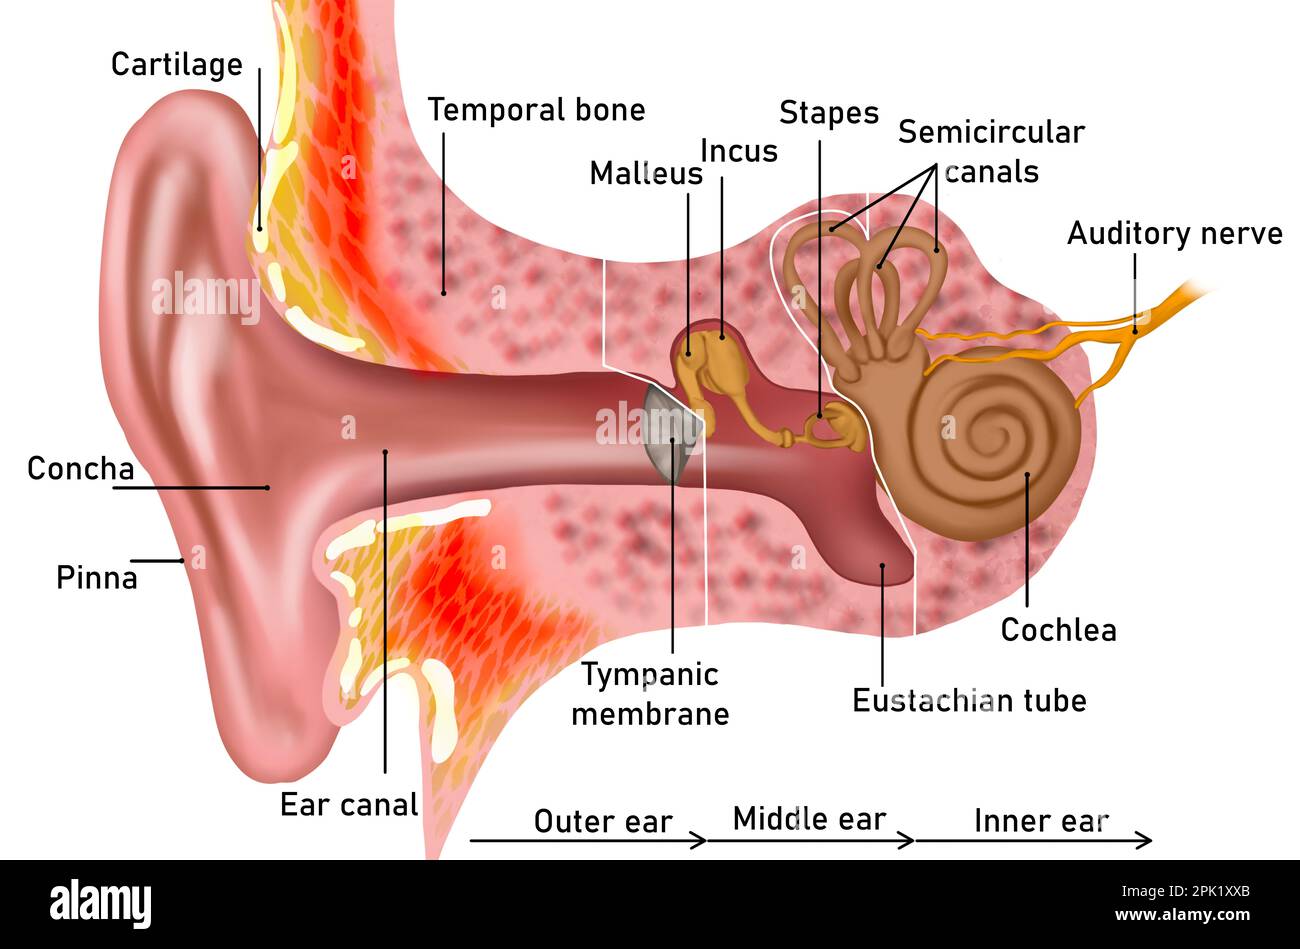 Stapes (ossicle of ear) - AnatomyZone